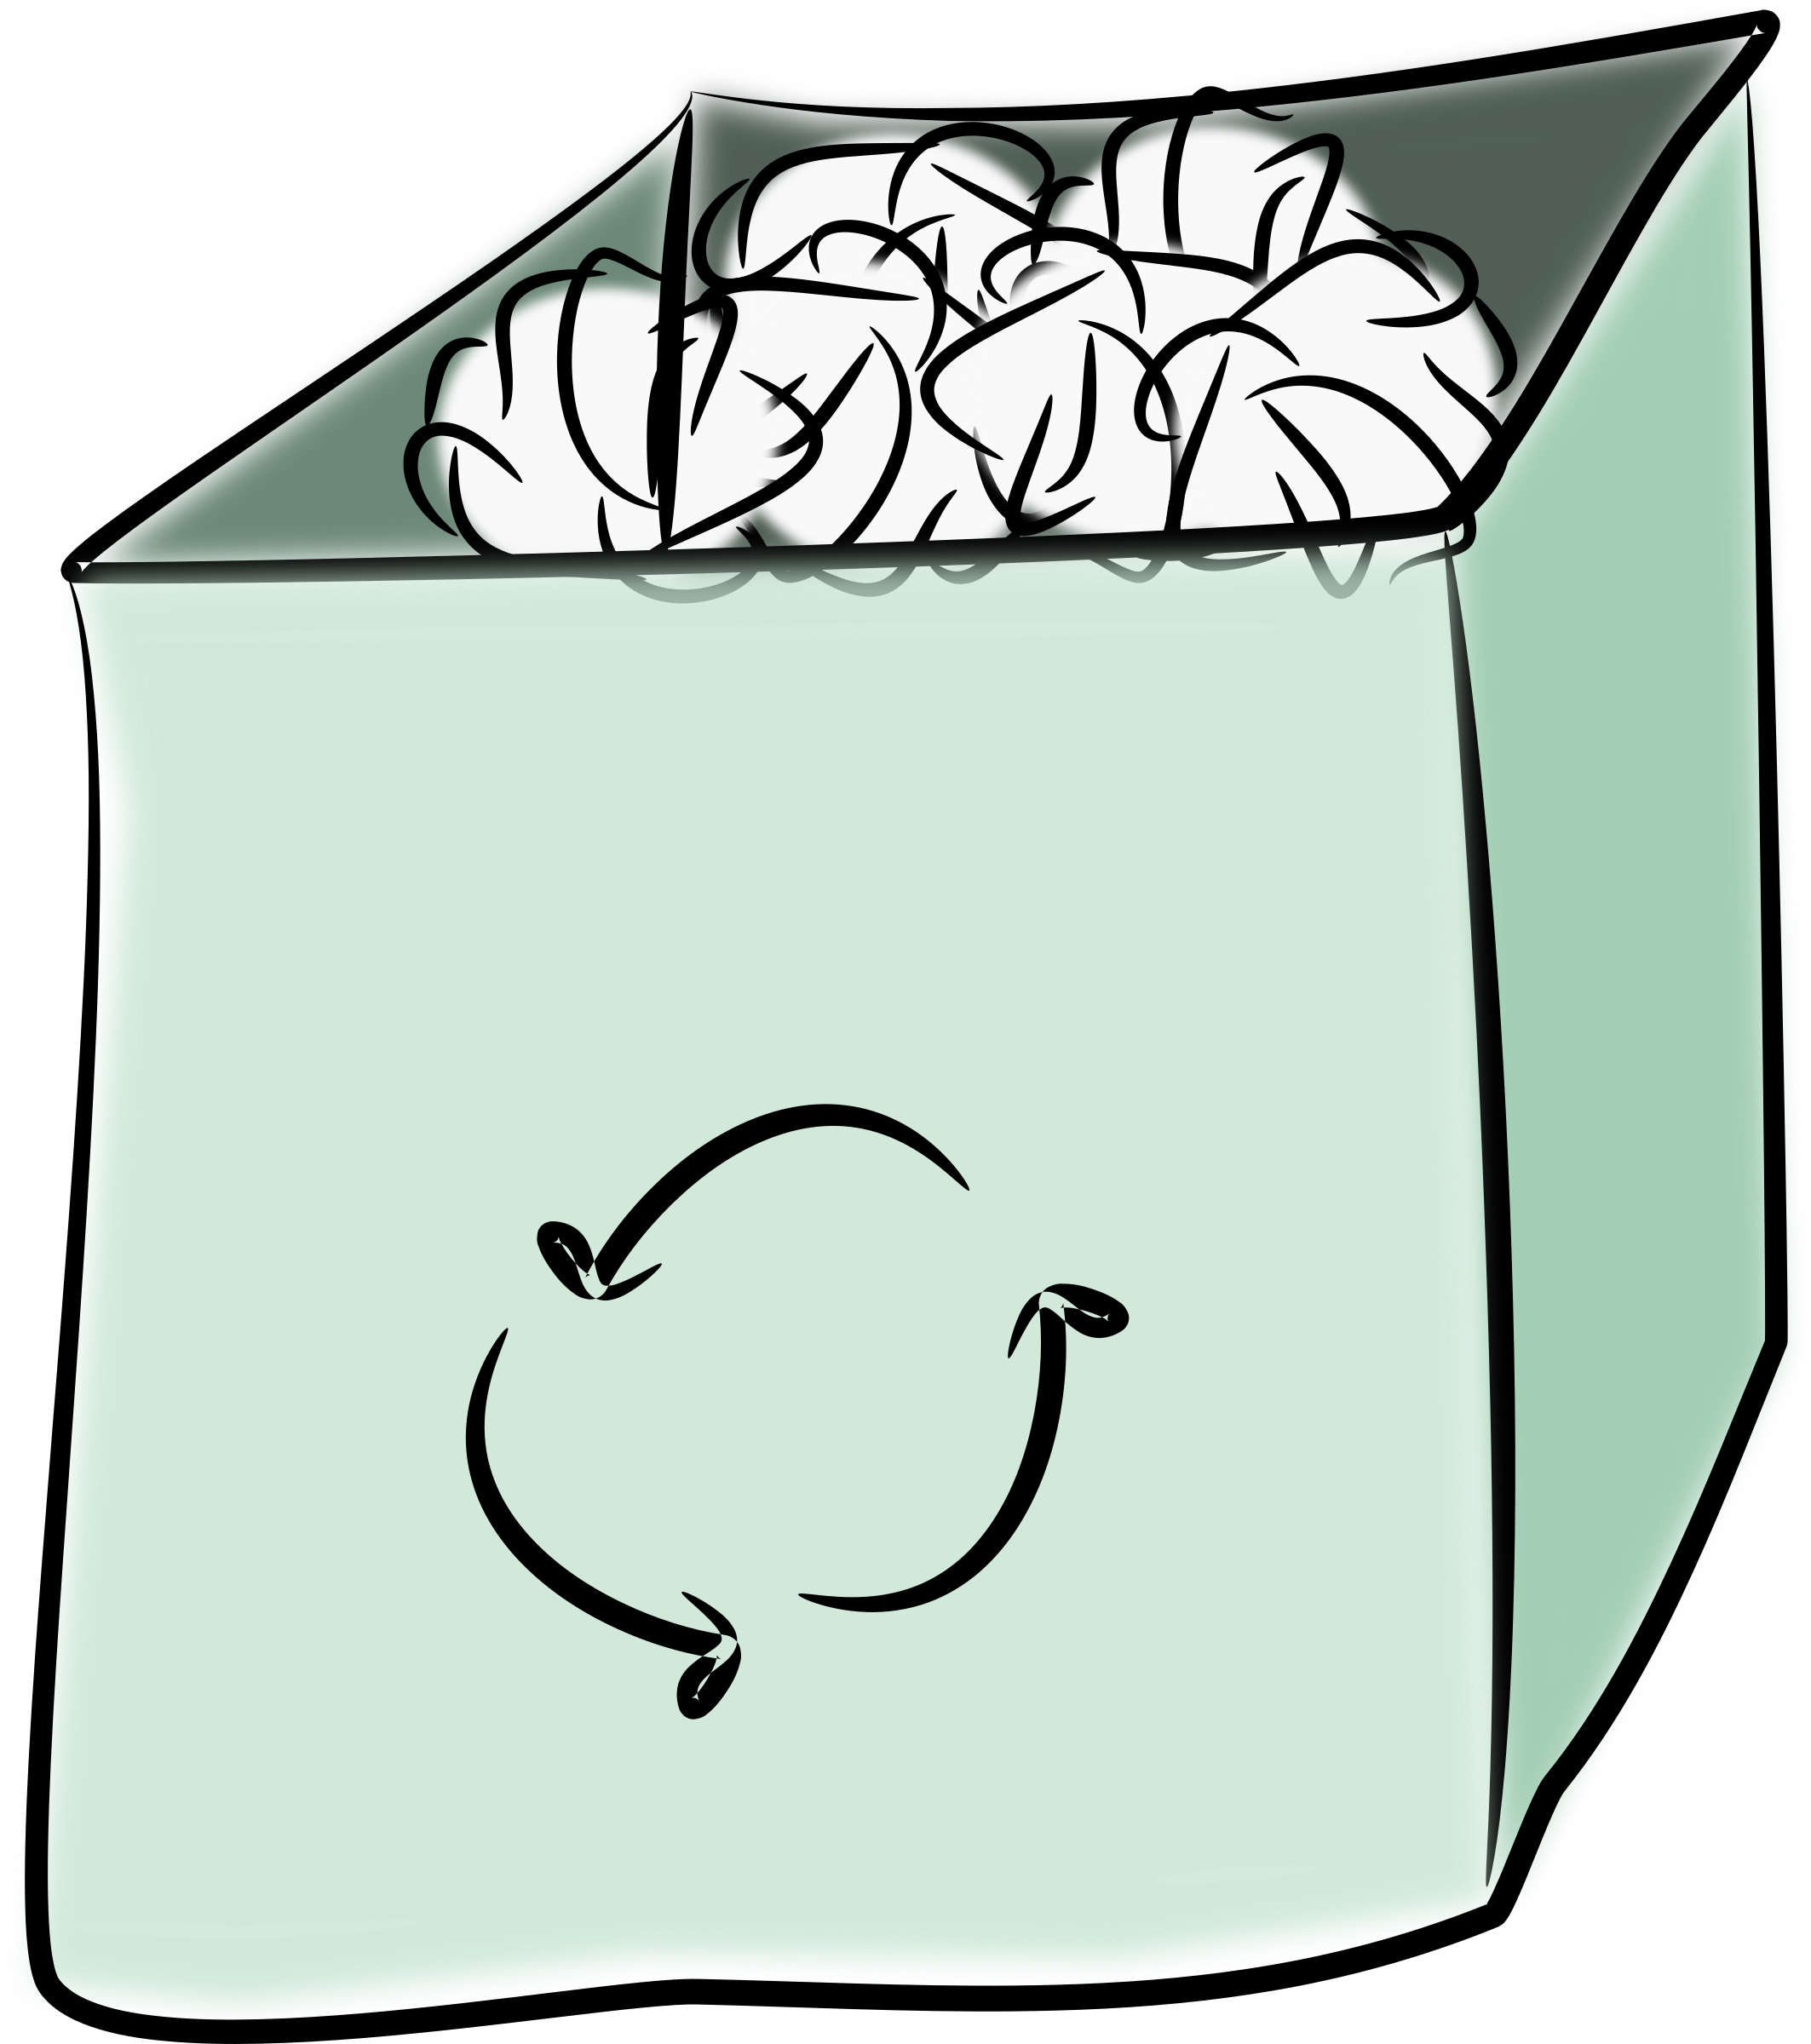 Trash big image png. Paper clipart recycle bin